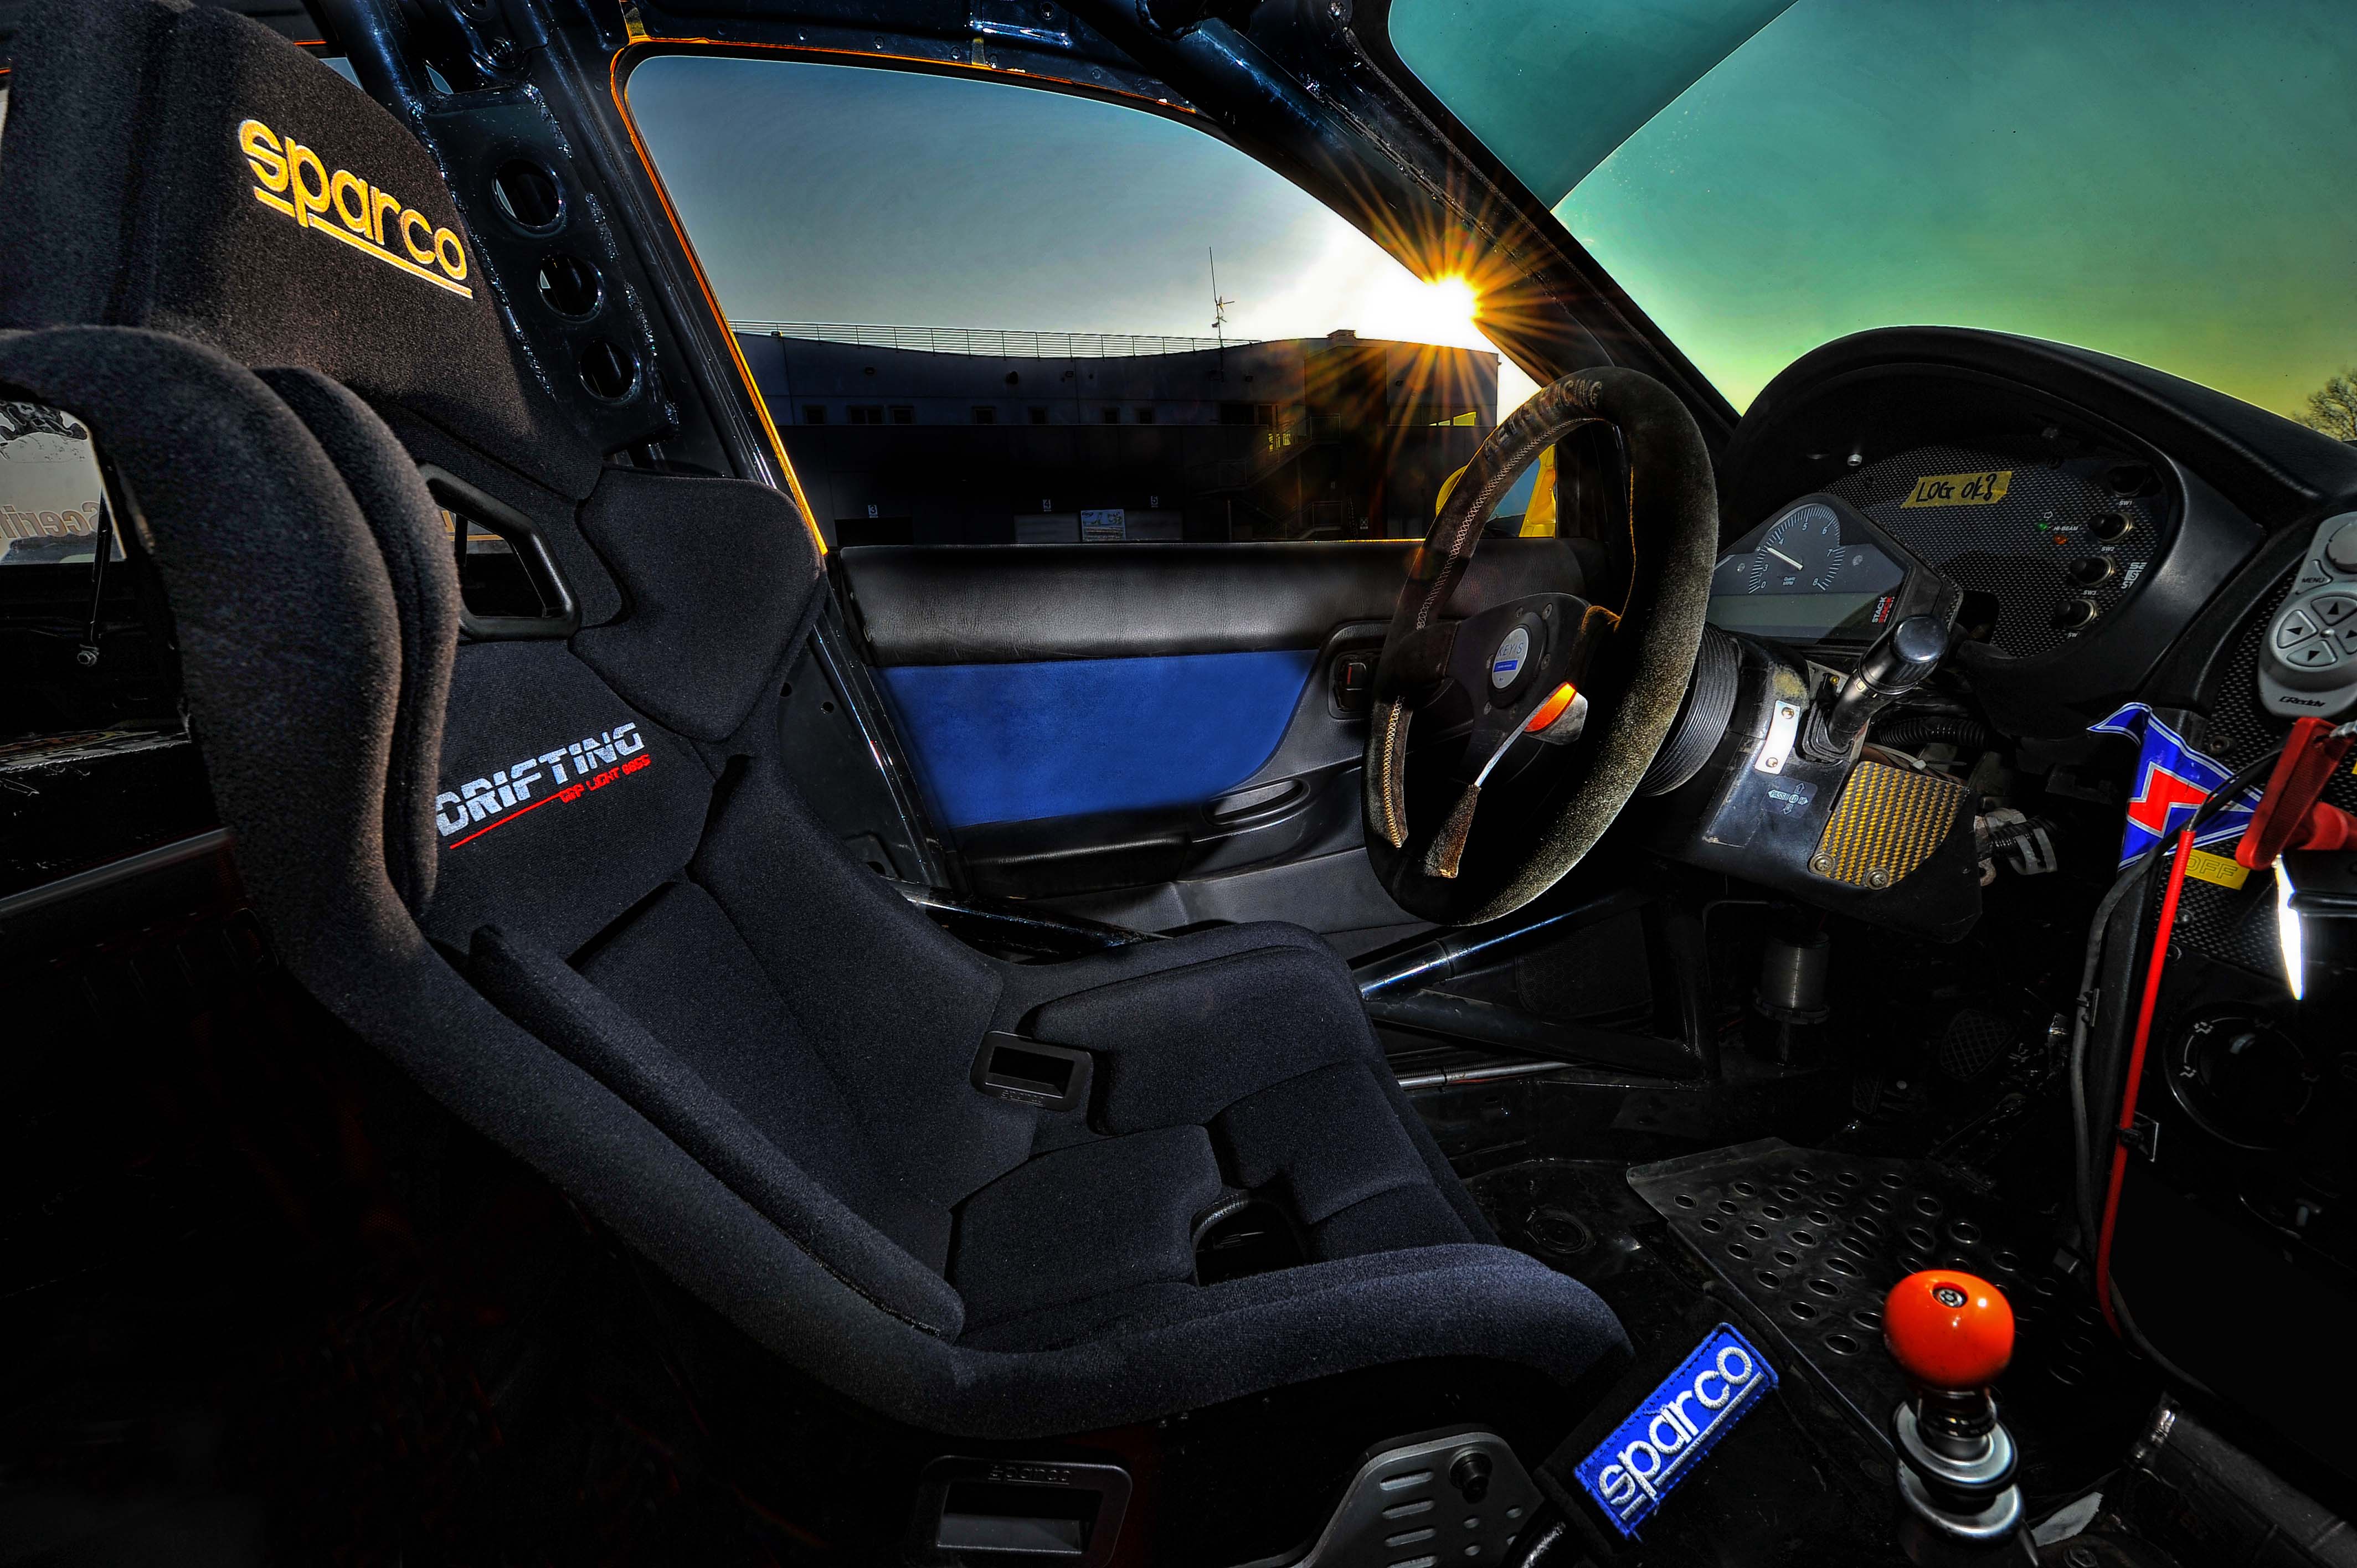 https://sparco-corsa.com/wp-content/uploads/2021/08/SPARCO_Steering-Wheel-Covers.jpg